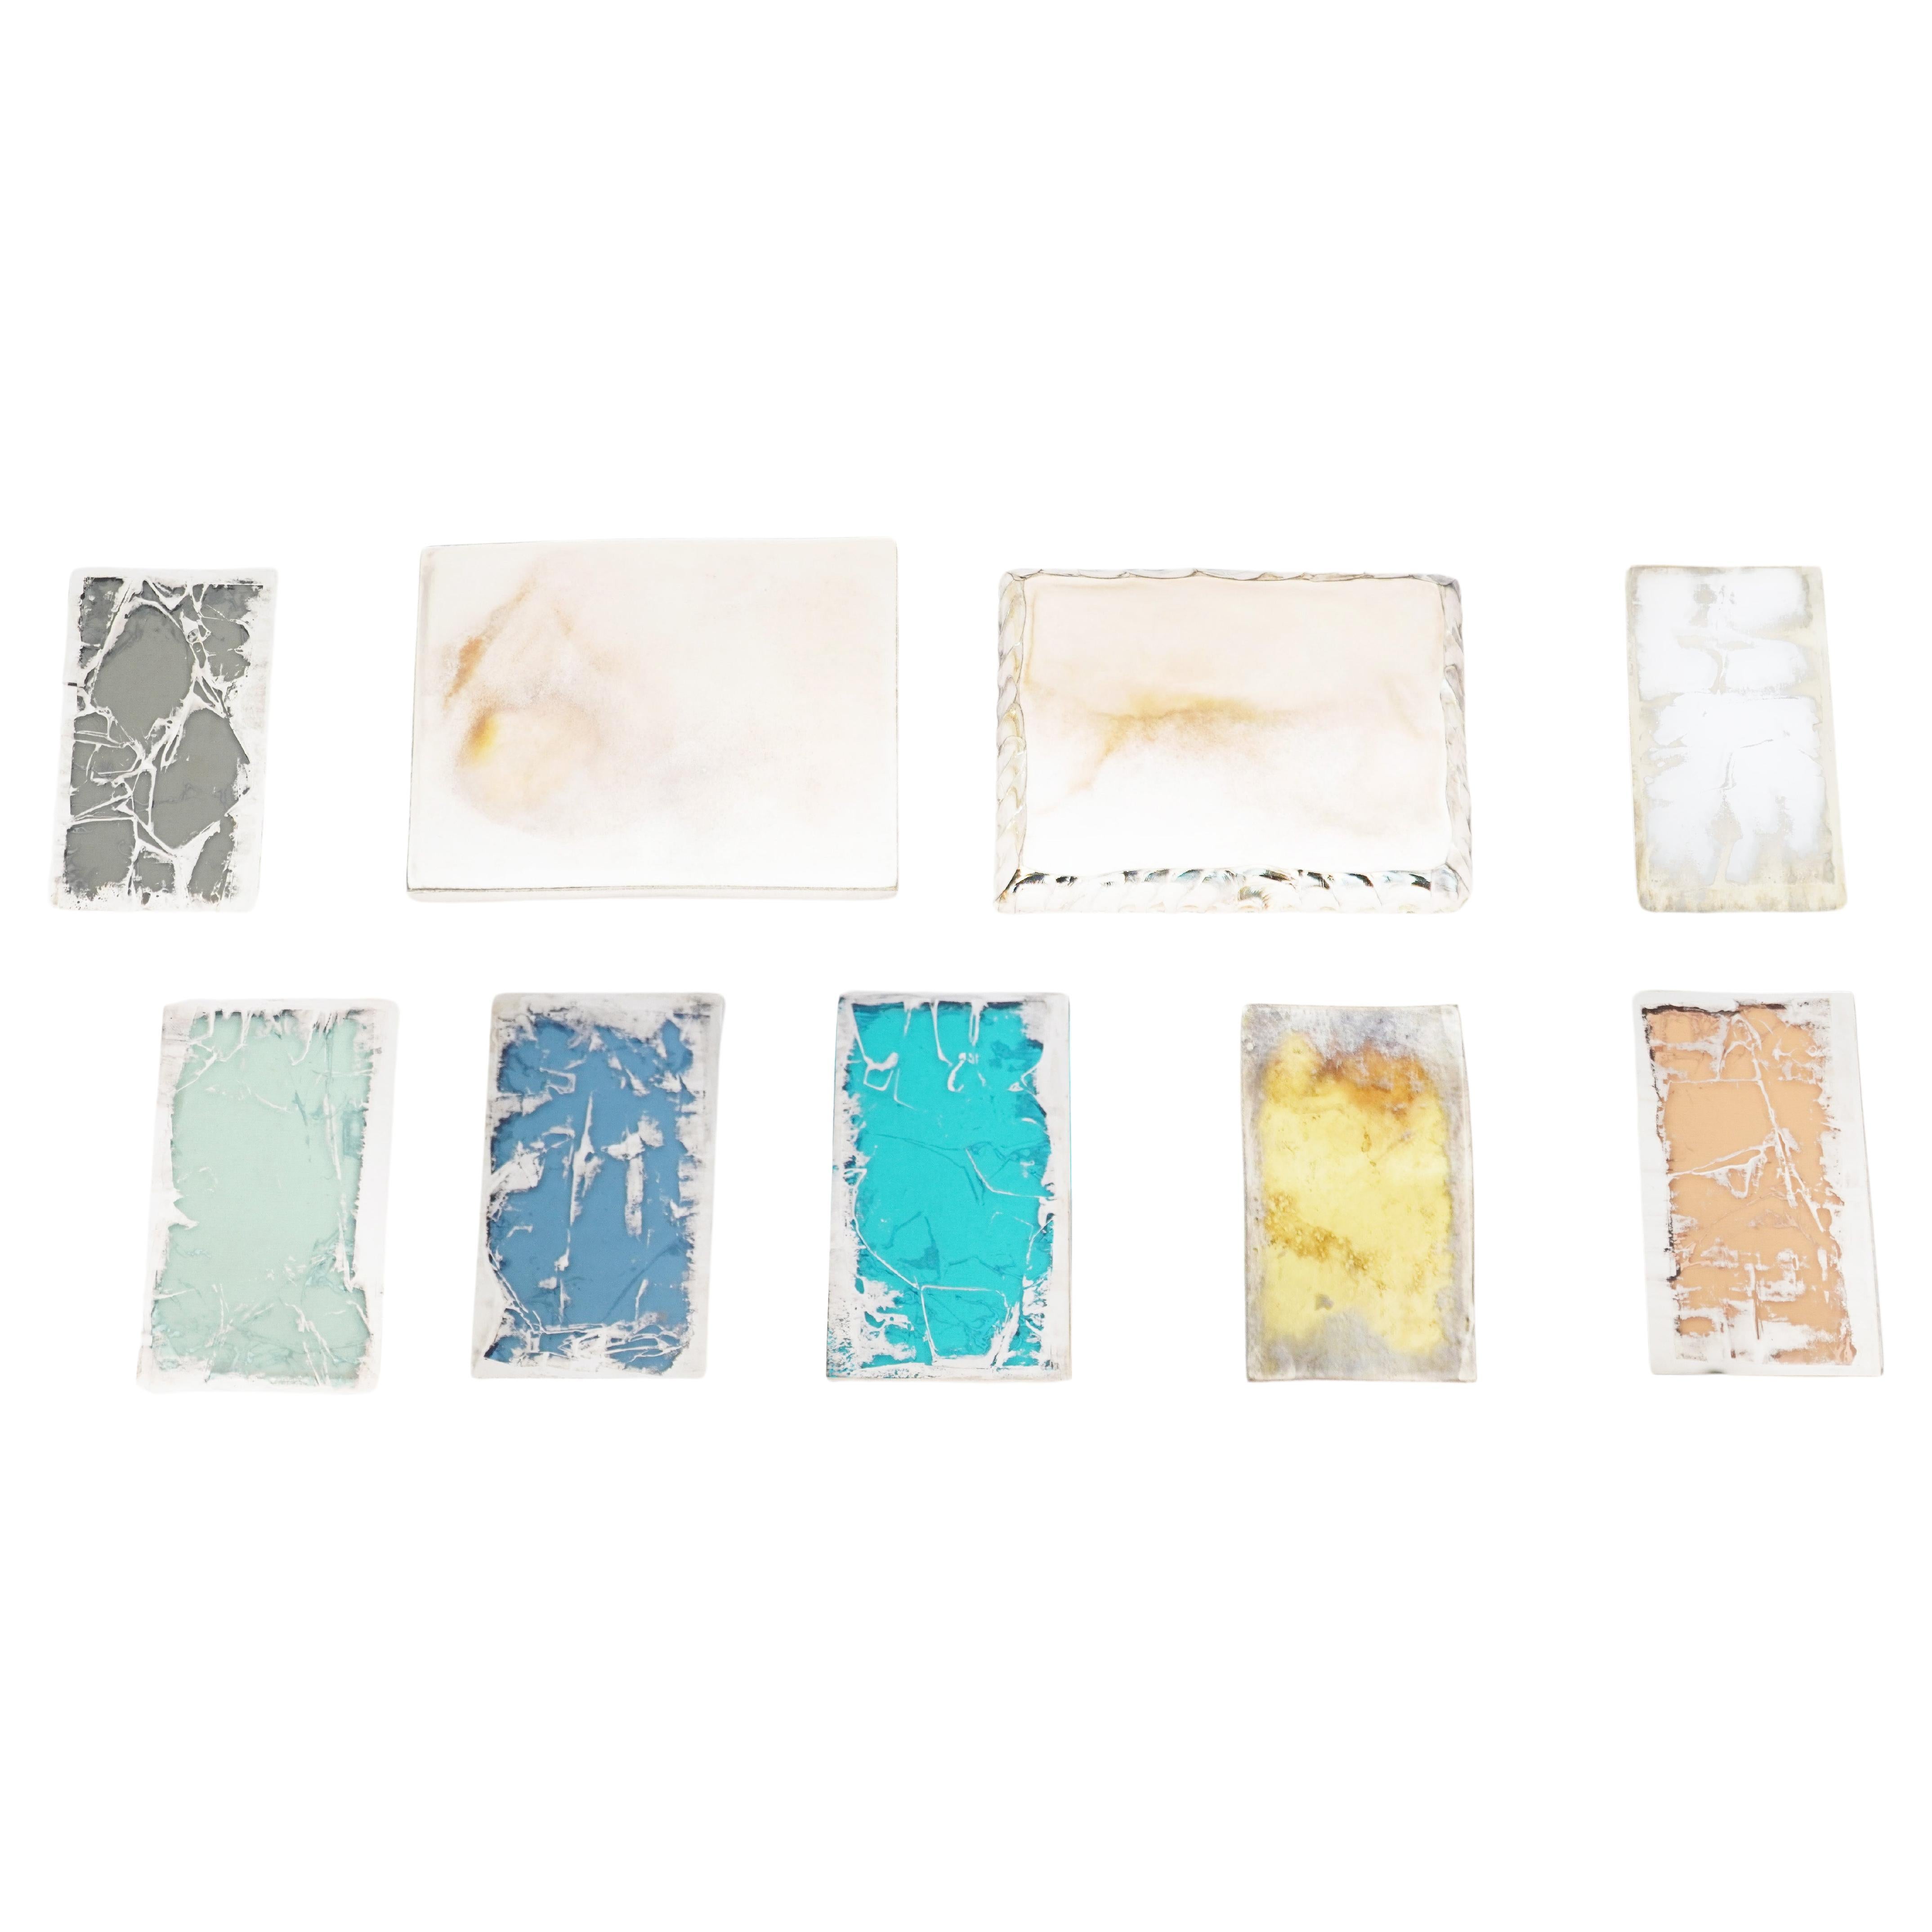 Sabrina Landini set of 3 Silvered Glass Samples, ask your favourite colors   For Sale